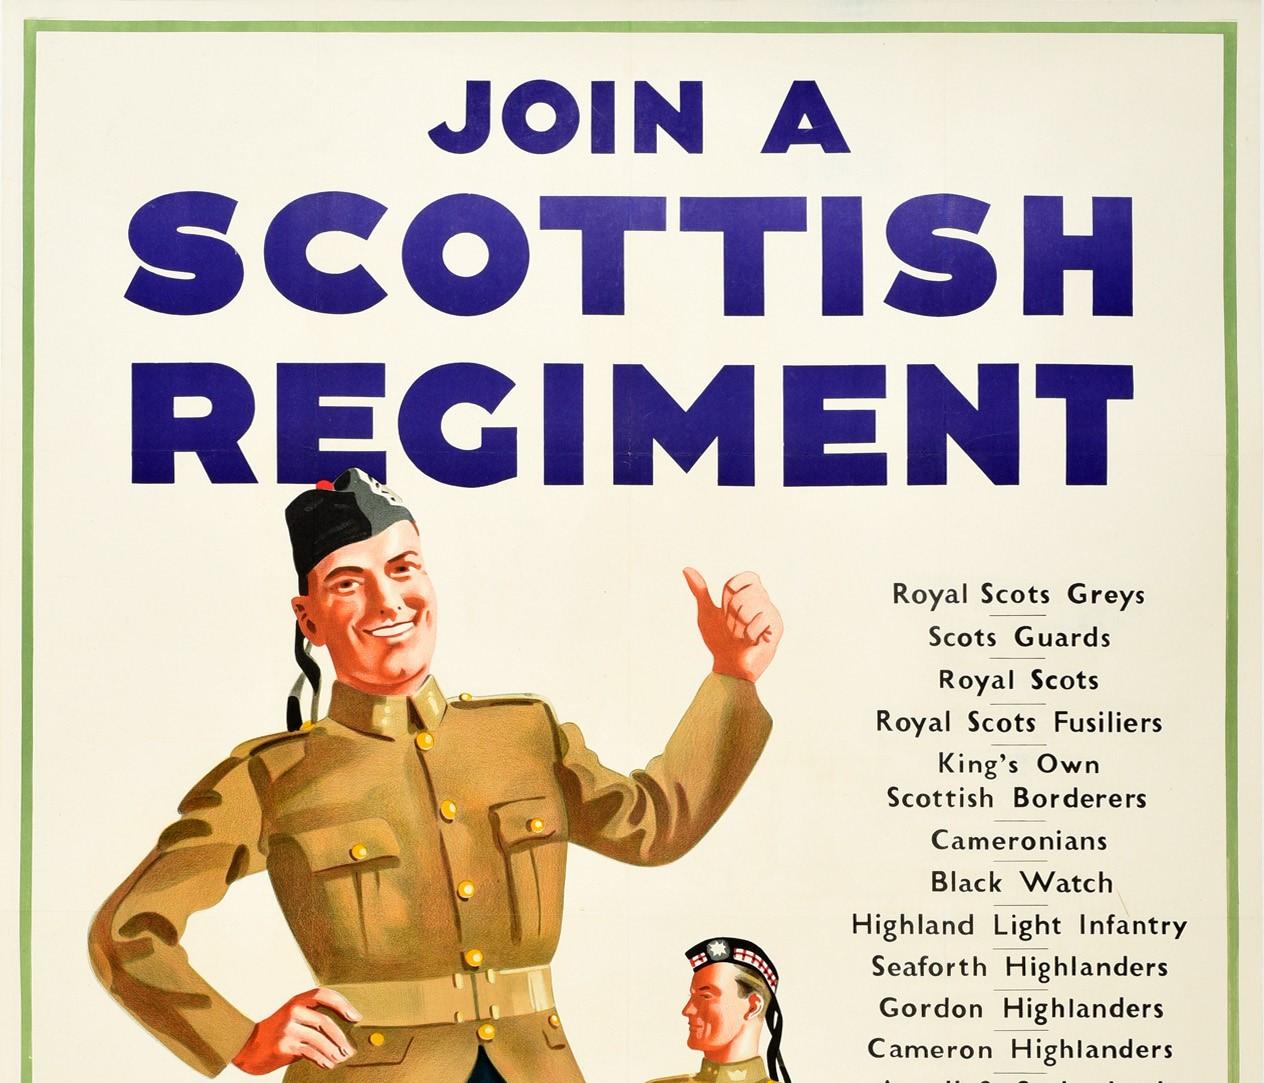 Rare original vintage army recruitment poster - Join a Scottish Regiment - featuring a great image by the notable artist most famous for his Guinness posters John Gilroy (John Thomas Young Gilroy; 1898-1985) depicting a smiling soldier wearing a